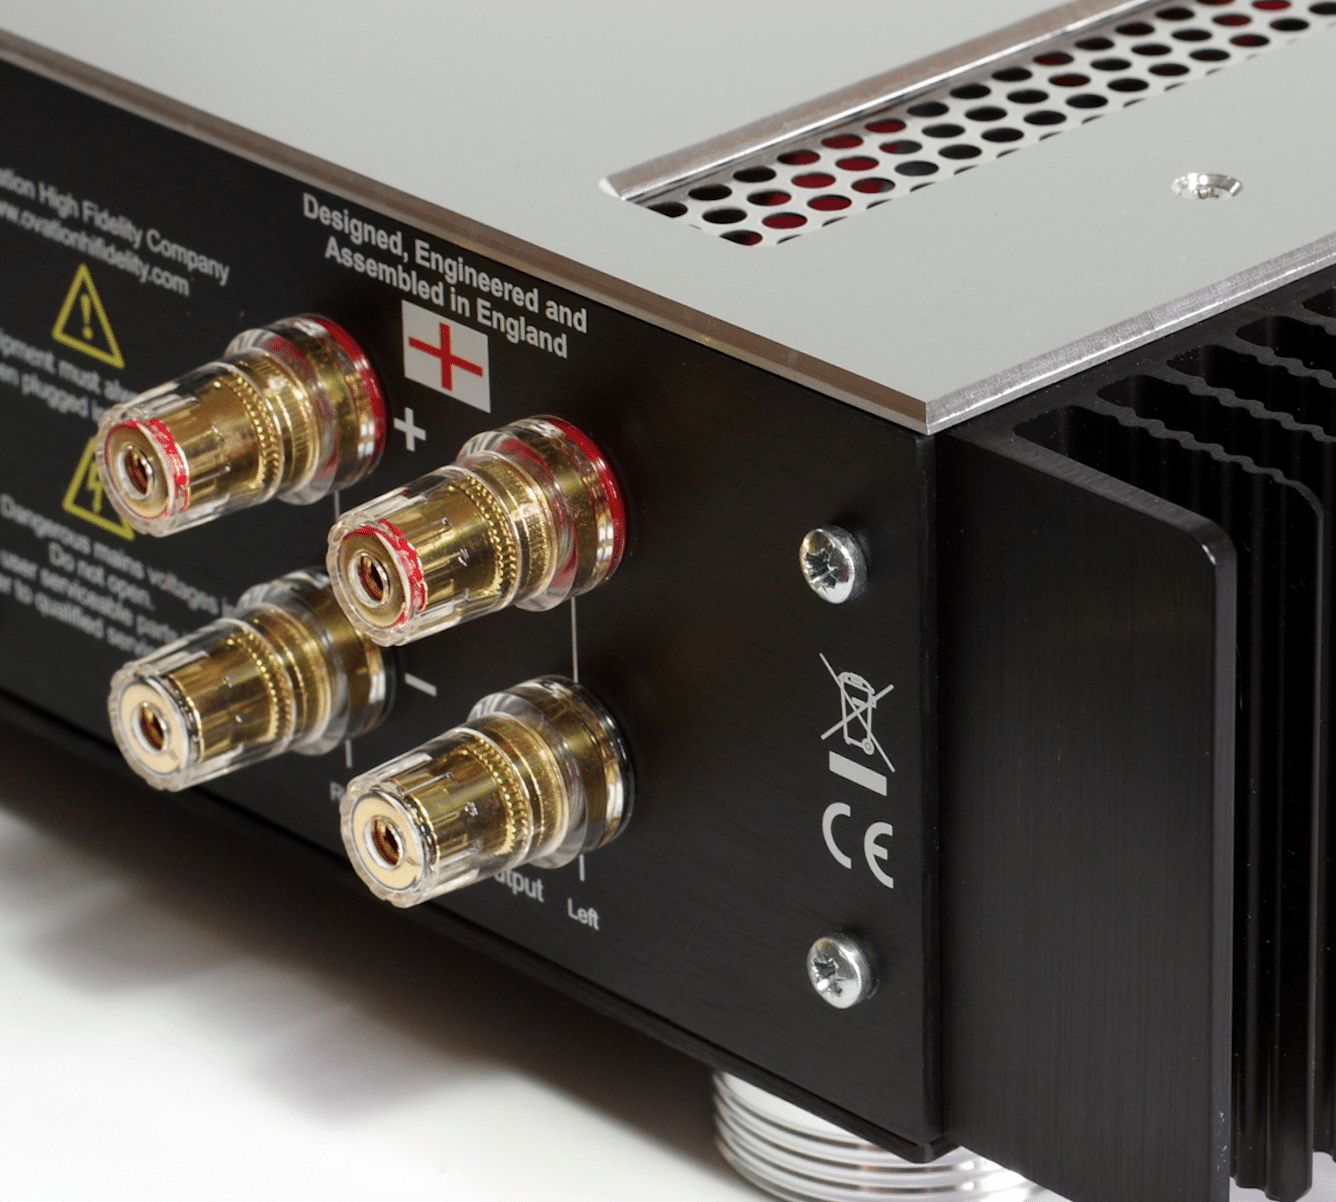 If you need to marry some power to your Pre, Paul Rigby may have the answer as he reviews the Model 1701 Ovation High Fidelity’s 100W Current Mode Topology class AB power amplifier